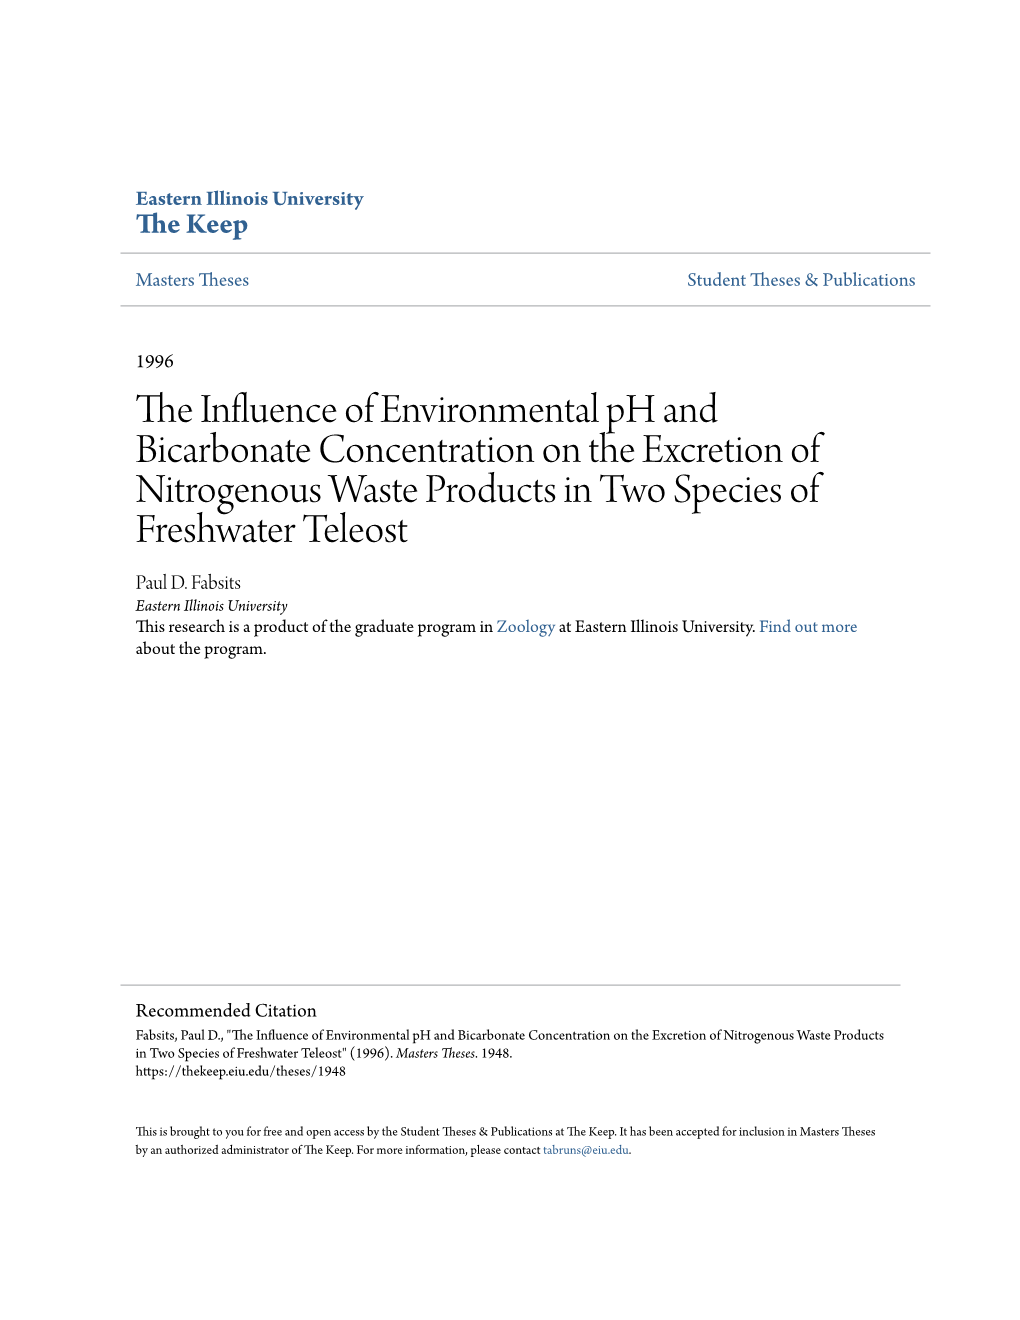 The Influence of Environmental Ph and Bicarbonate Concentration On